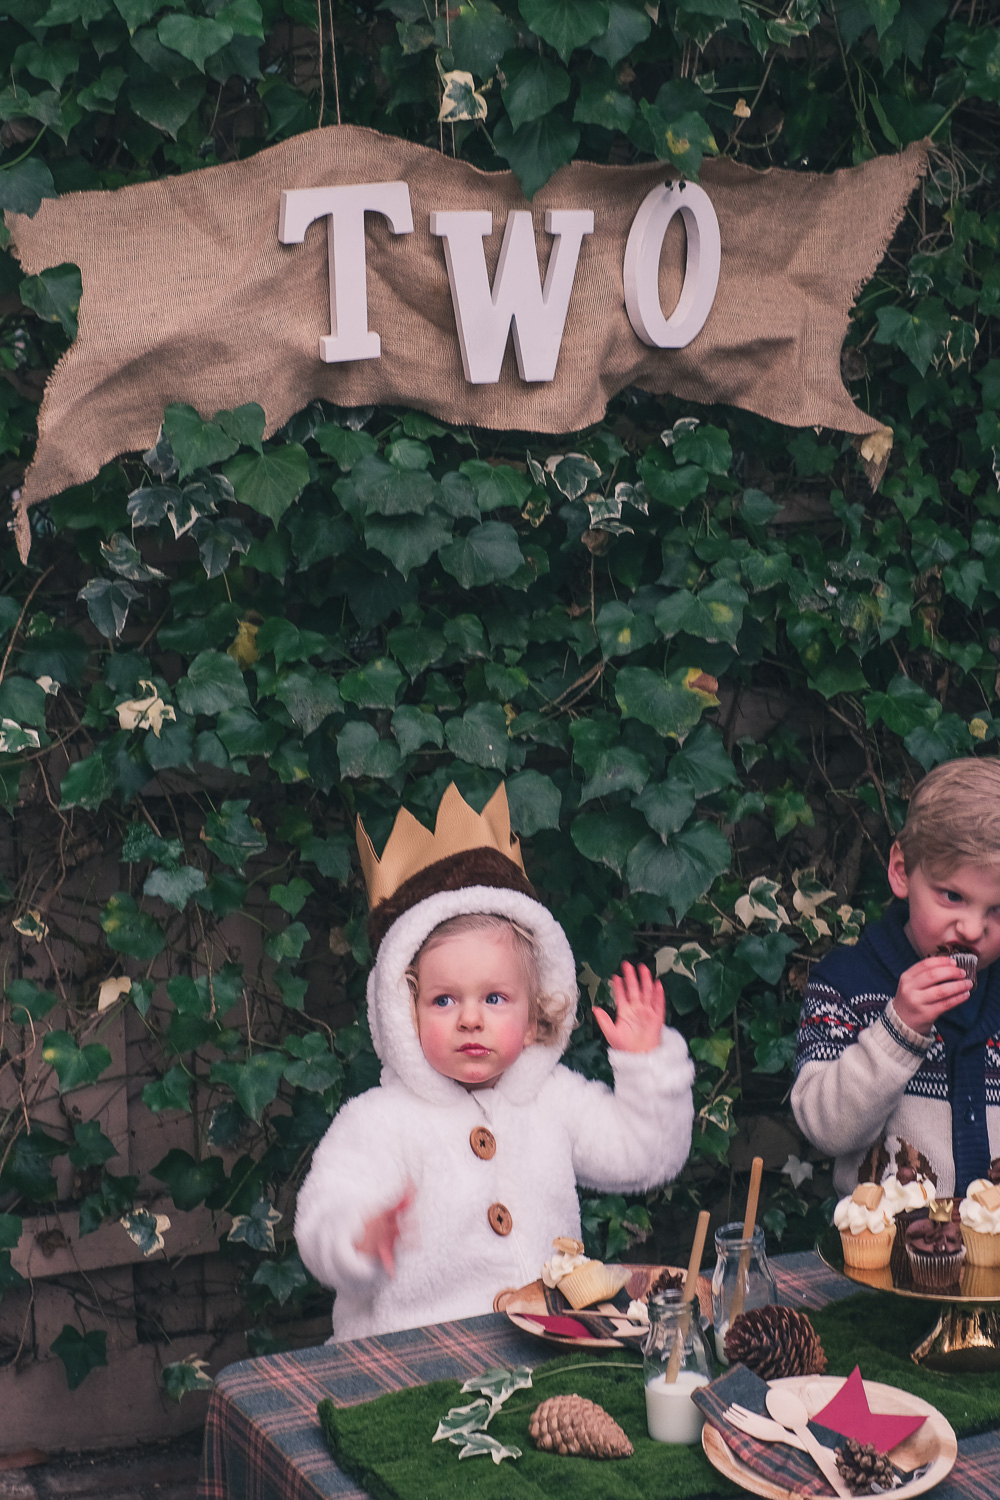 Where the Wild Things Are party sign and child in costume